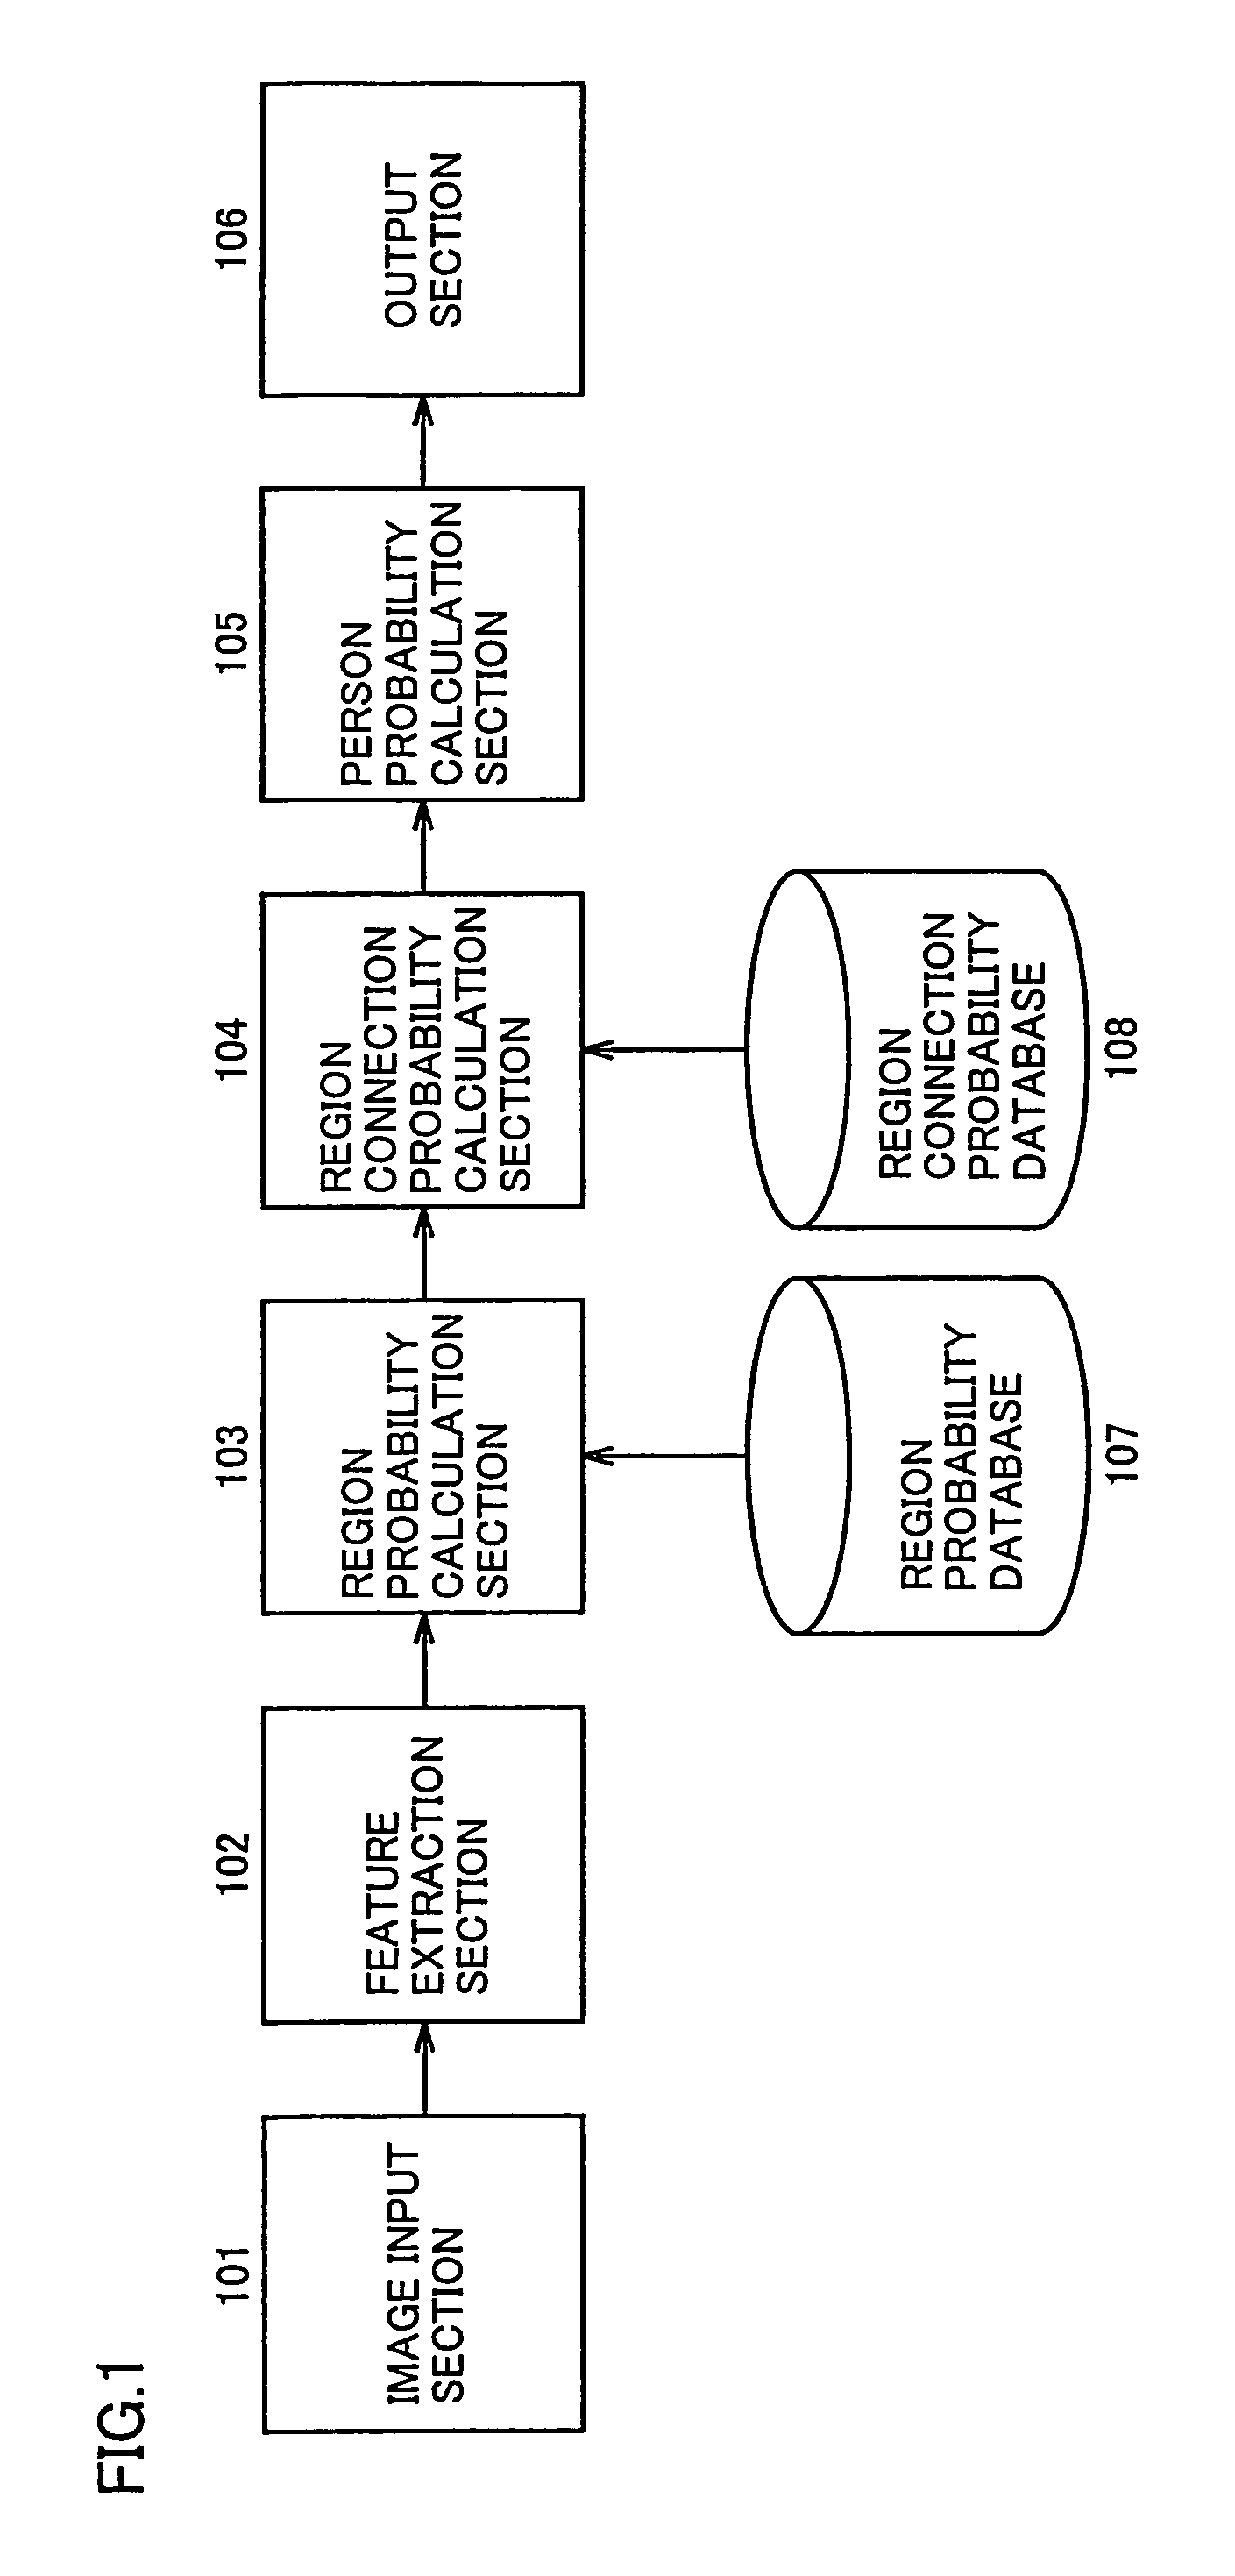 Method for detecting object formed of regions from image